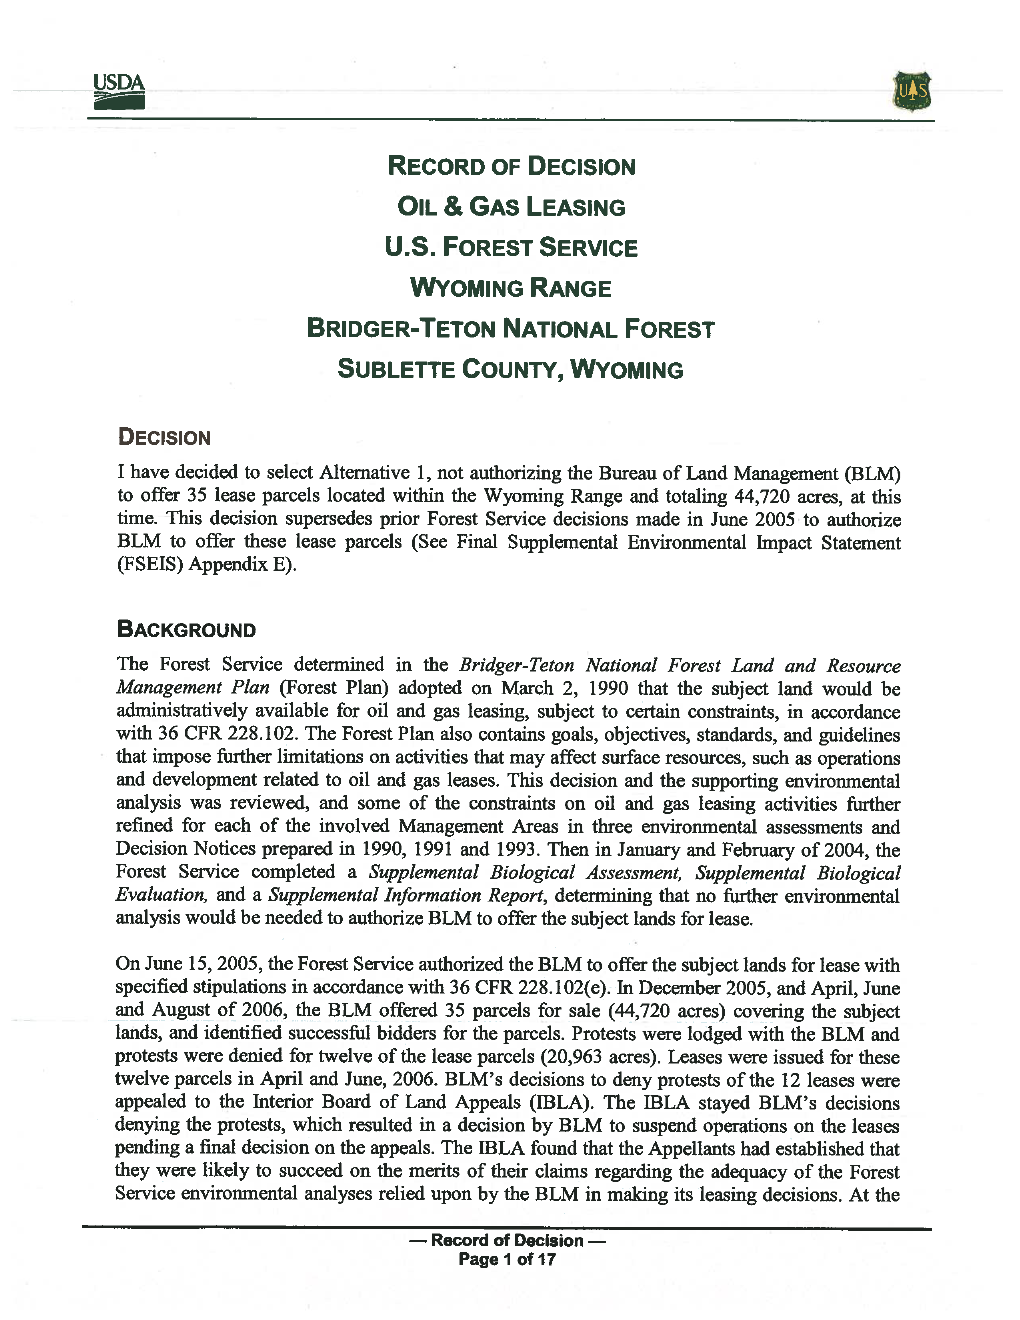 Record of Decision Oil & Gas Leasing U.S. Forest Service